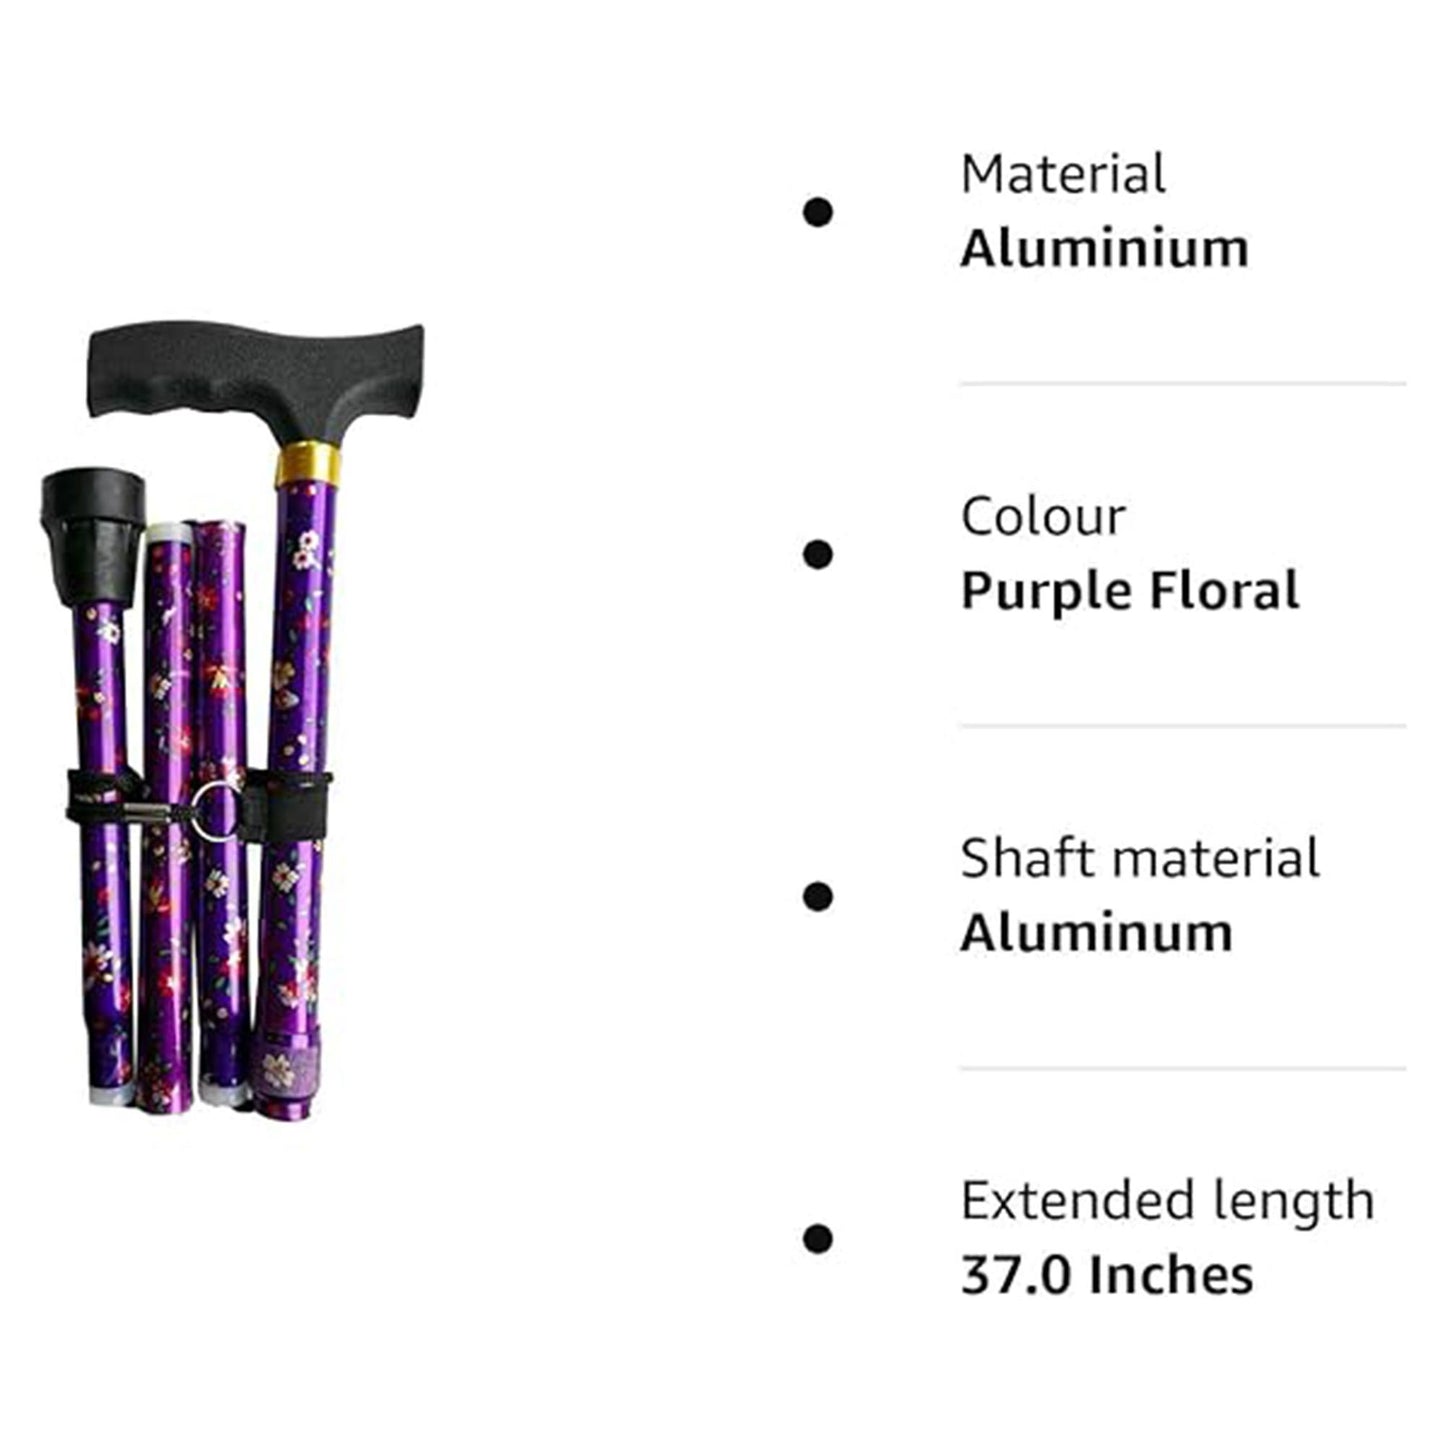 Deluxe Folding Compact 4-part Ladies Walking Stick, Stunning Floral Print with a Unique Ergonomic Easy-Grip Moulded Handle and Adjustable Height Walking Cane for Women - 32.5” – 37”